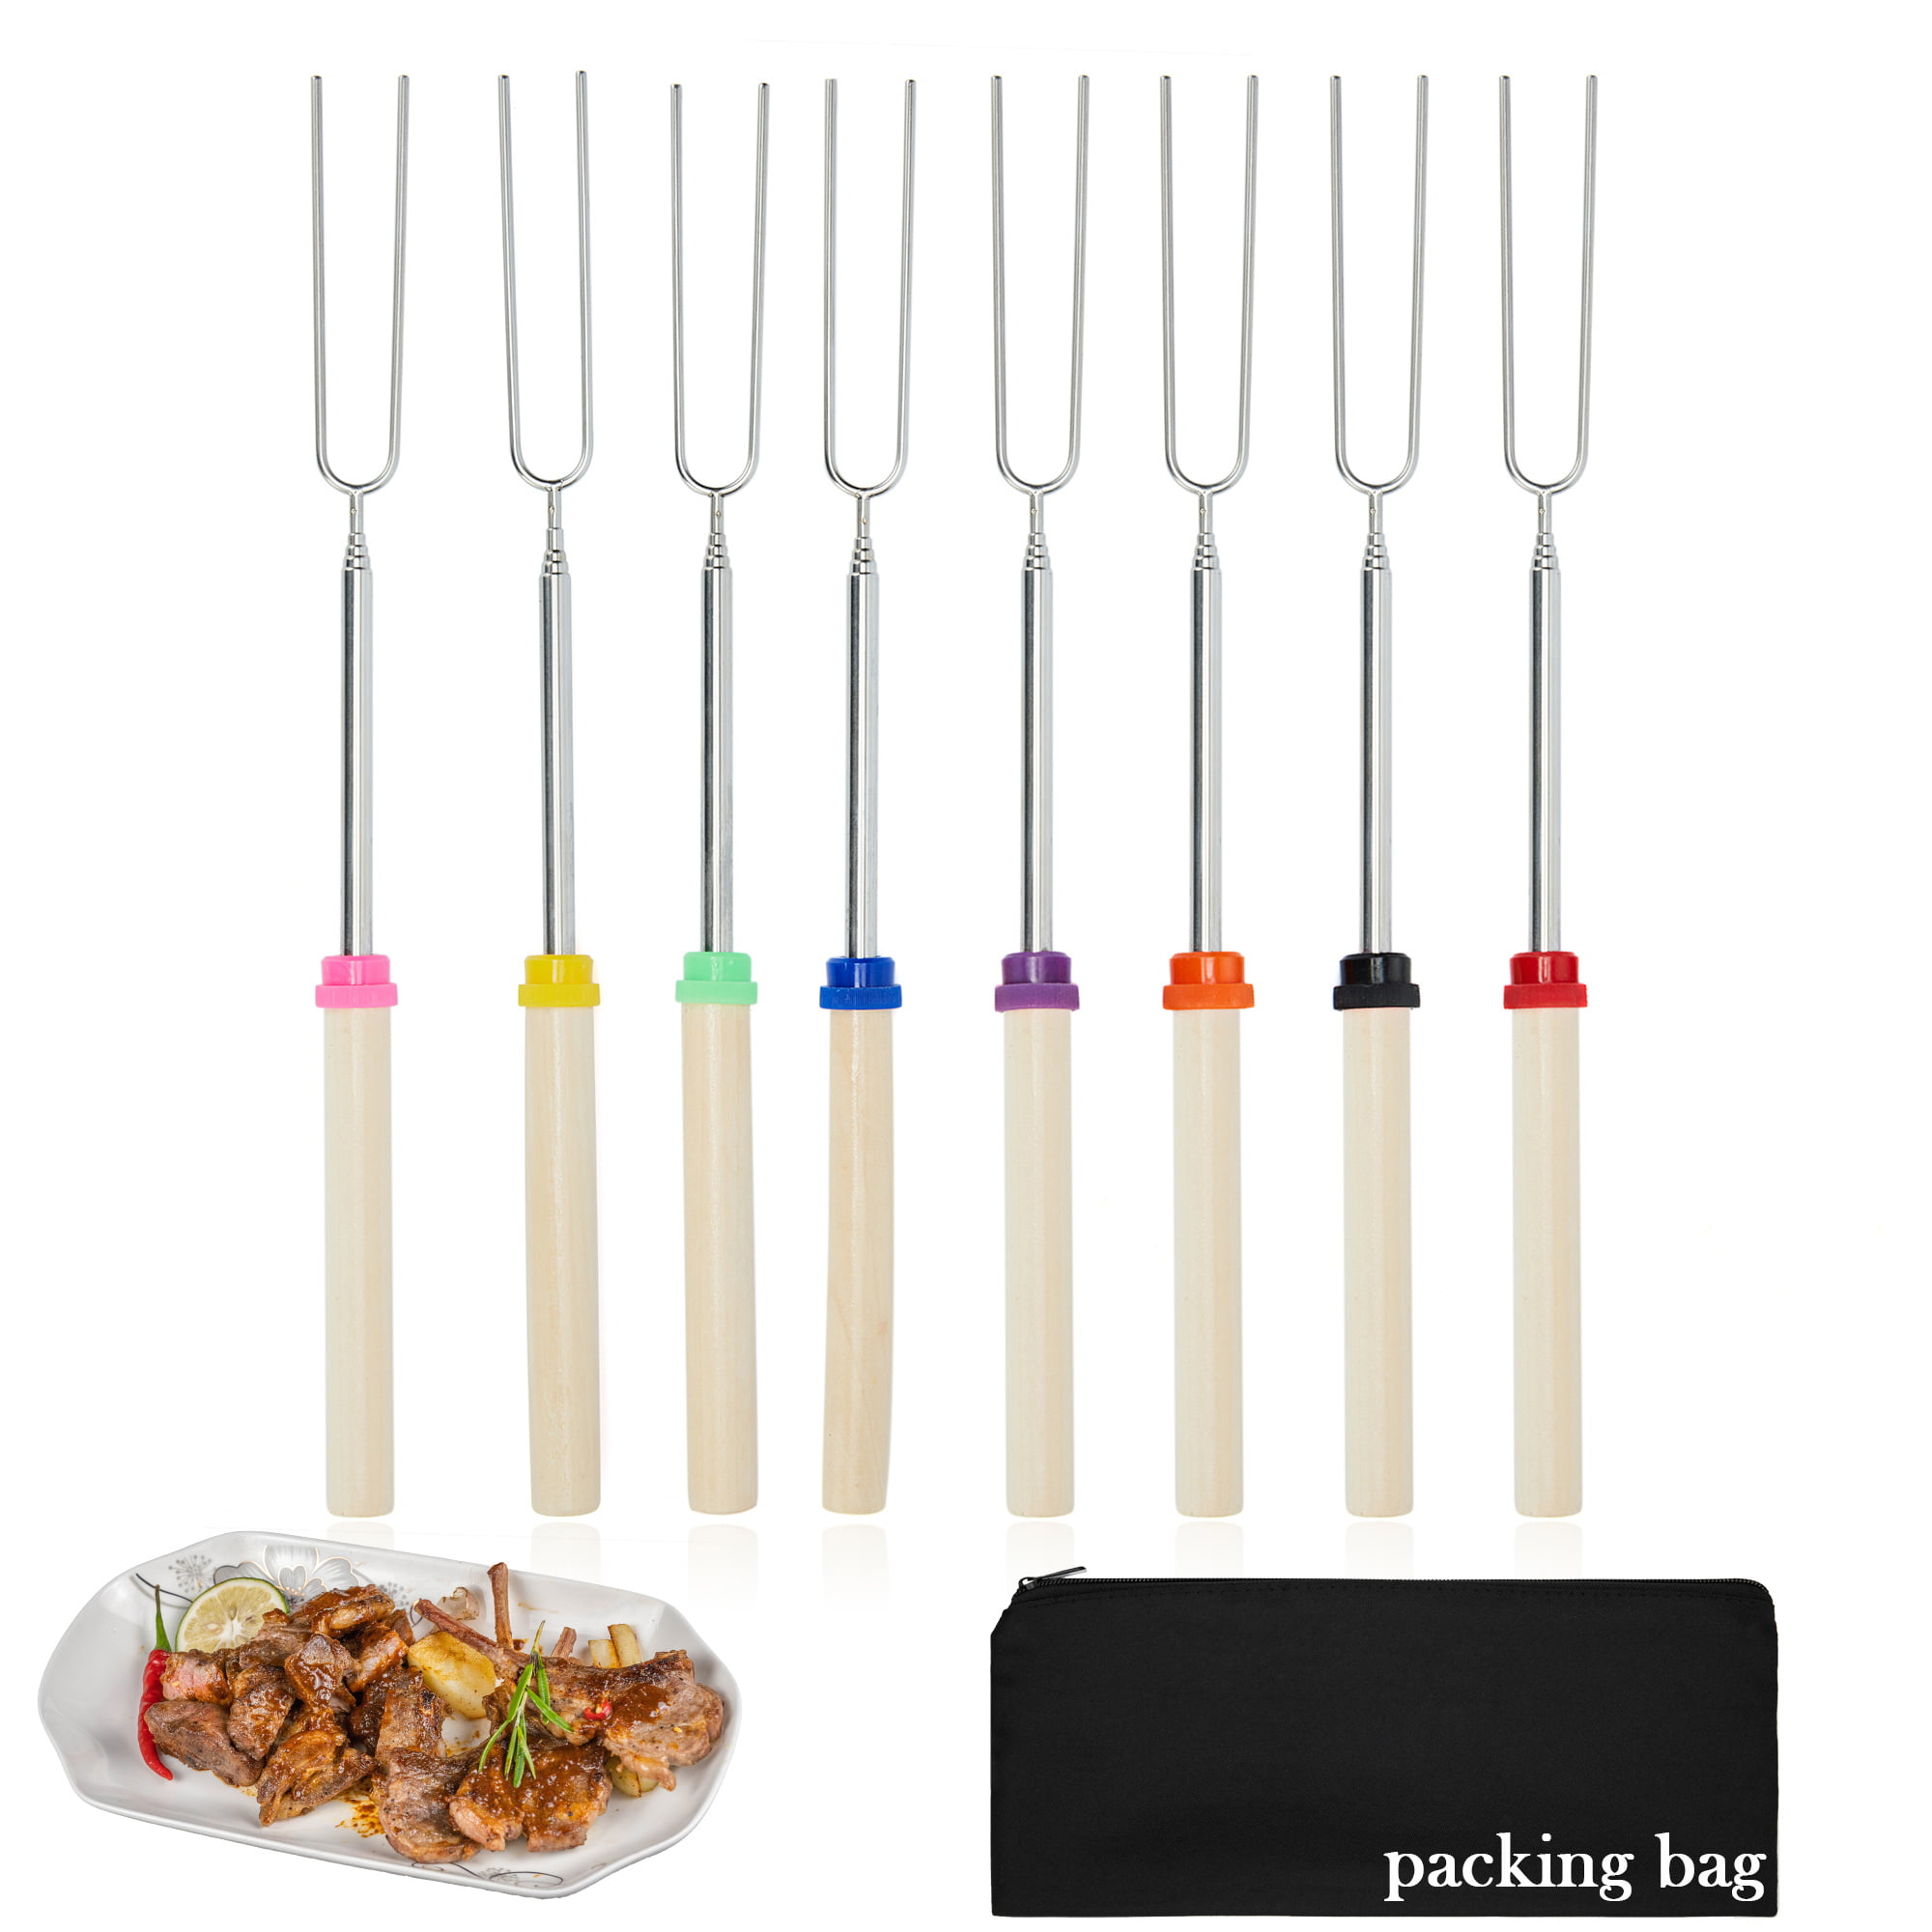 32-inch Stainless Steel Barbecue Forks Sticks with Wooden Handle Roasting Sticks for Campfire Camping Set of 8 Newthinking Extendable Marshmallow Roasting Sticks Fire Pits 